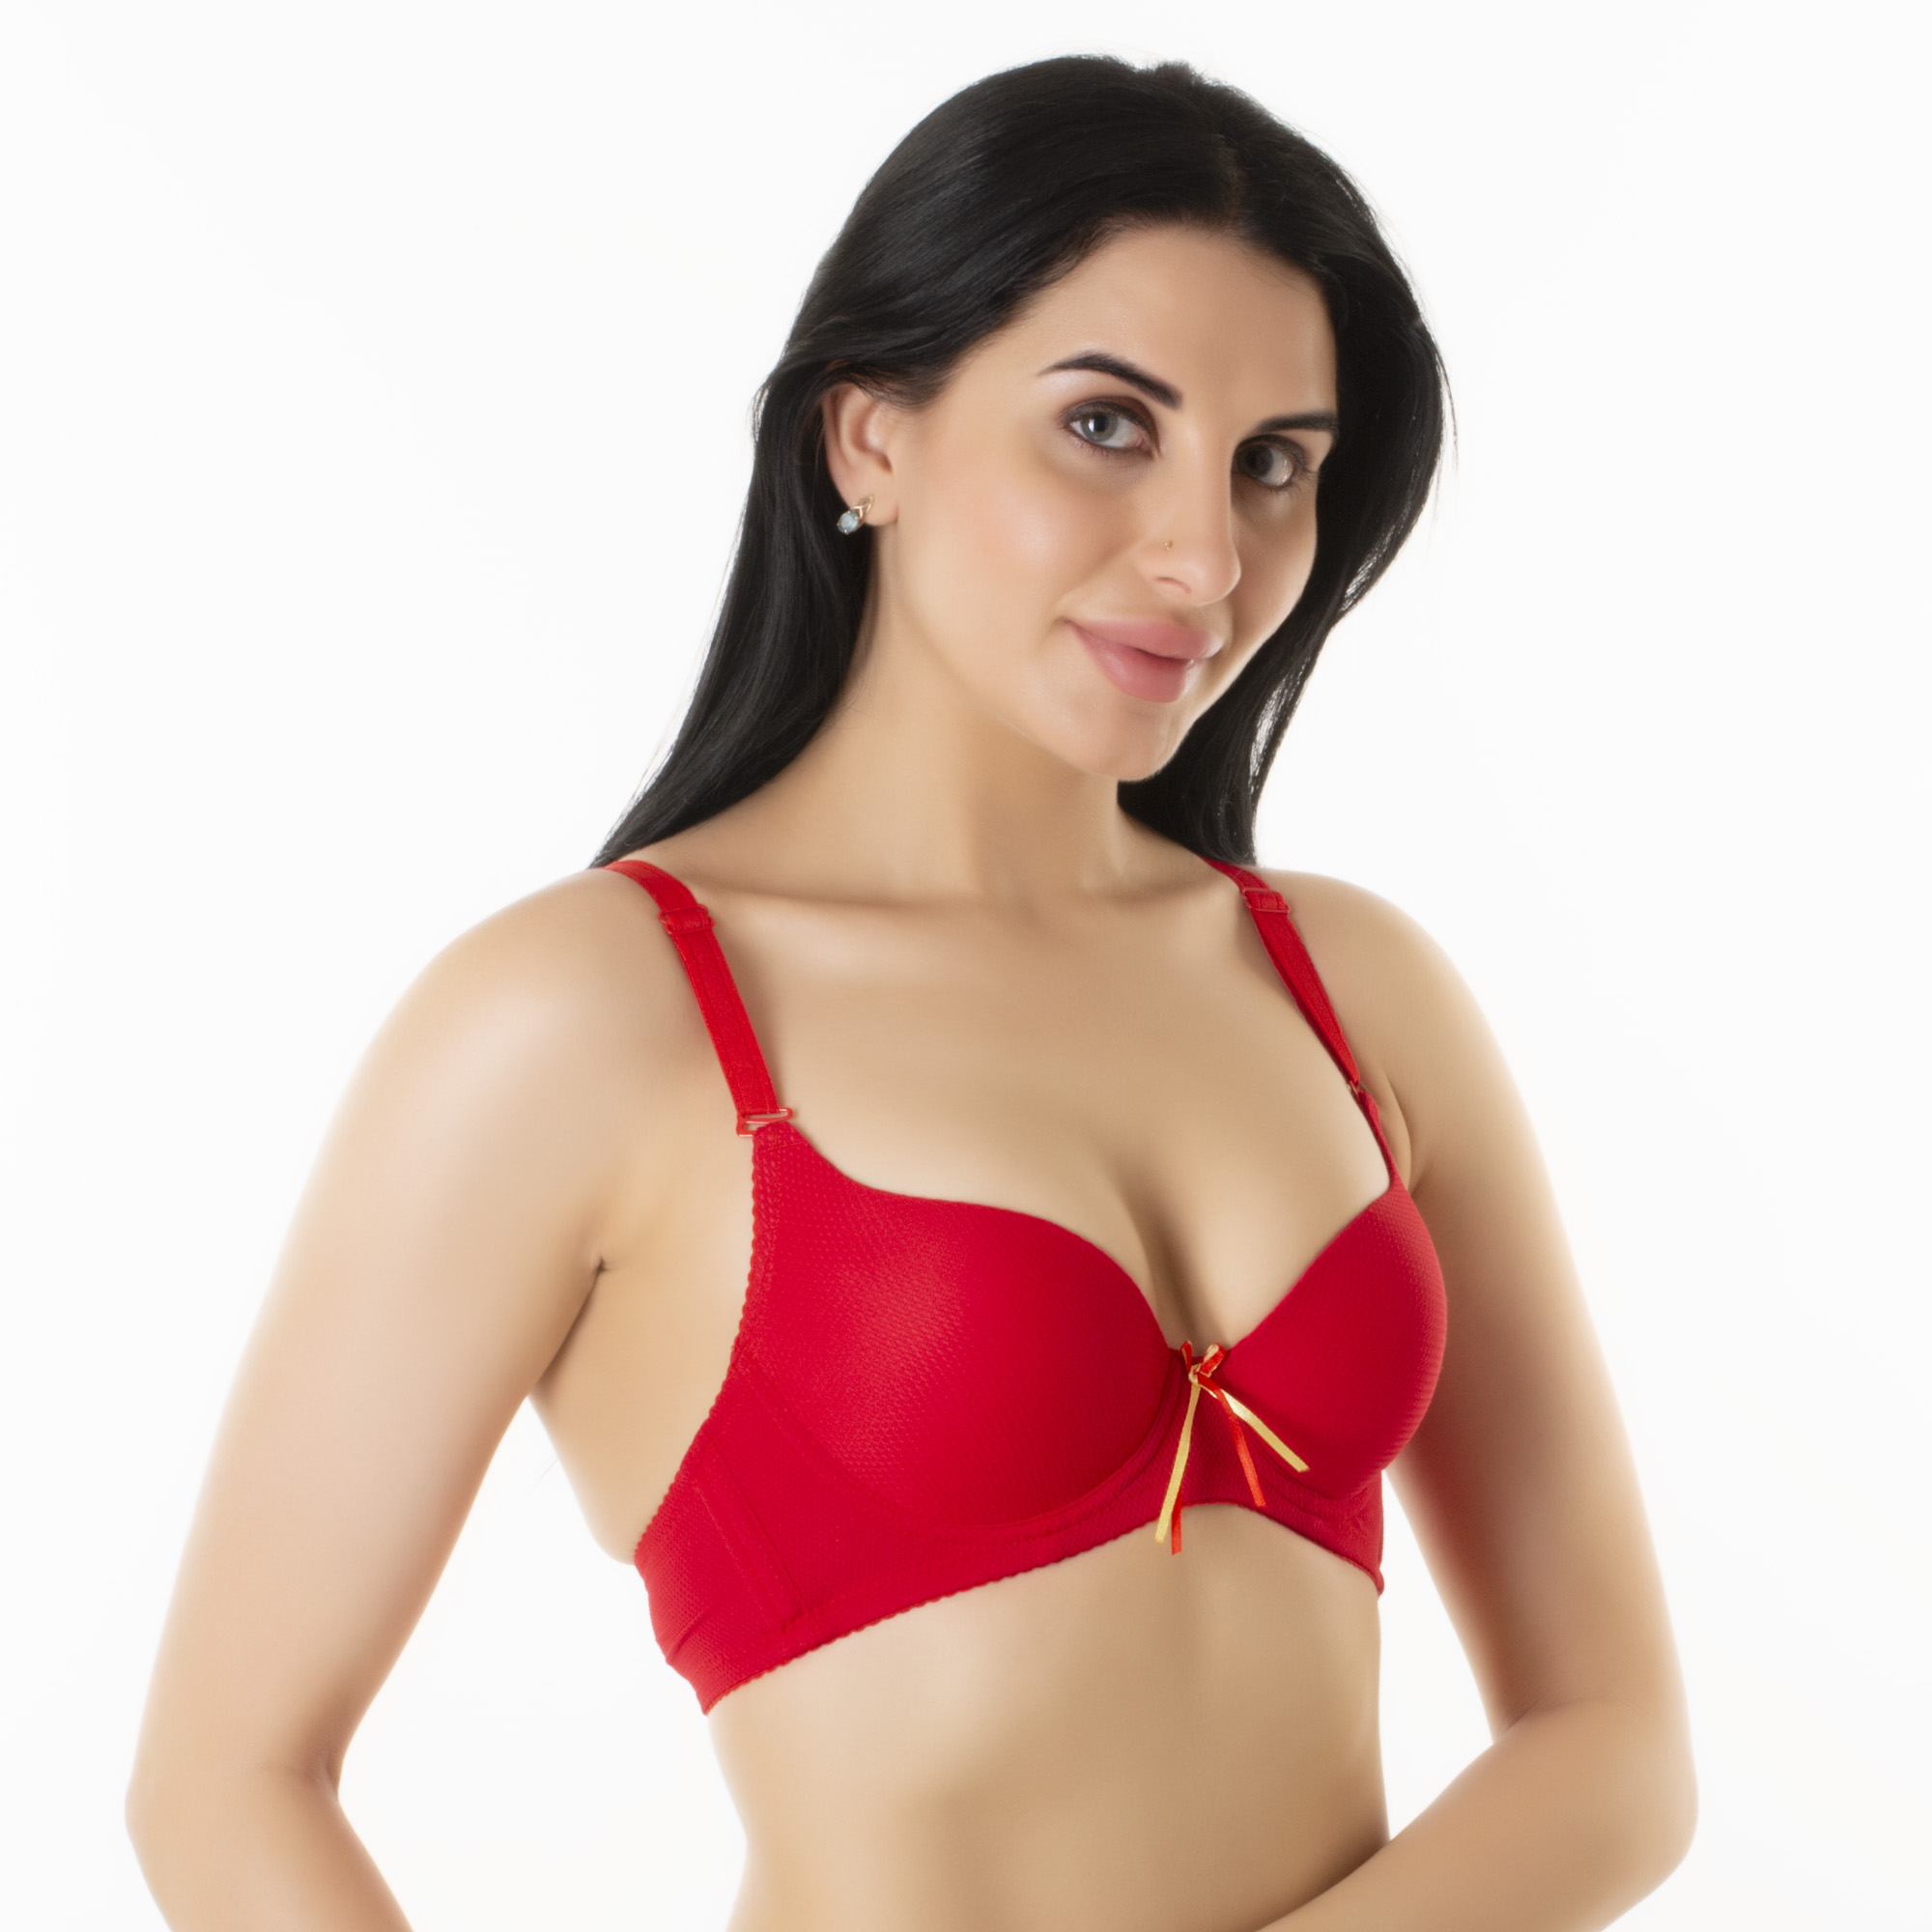 Padded Underwired Multiway T-Shirt Bra in Modal Fabric